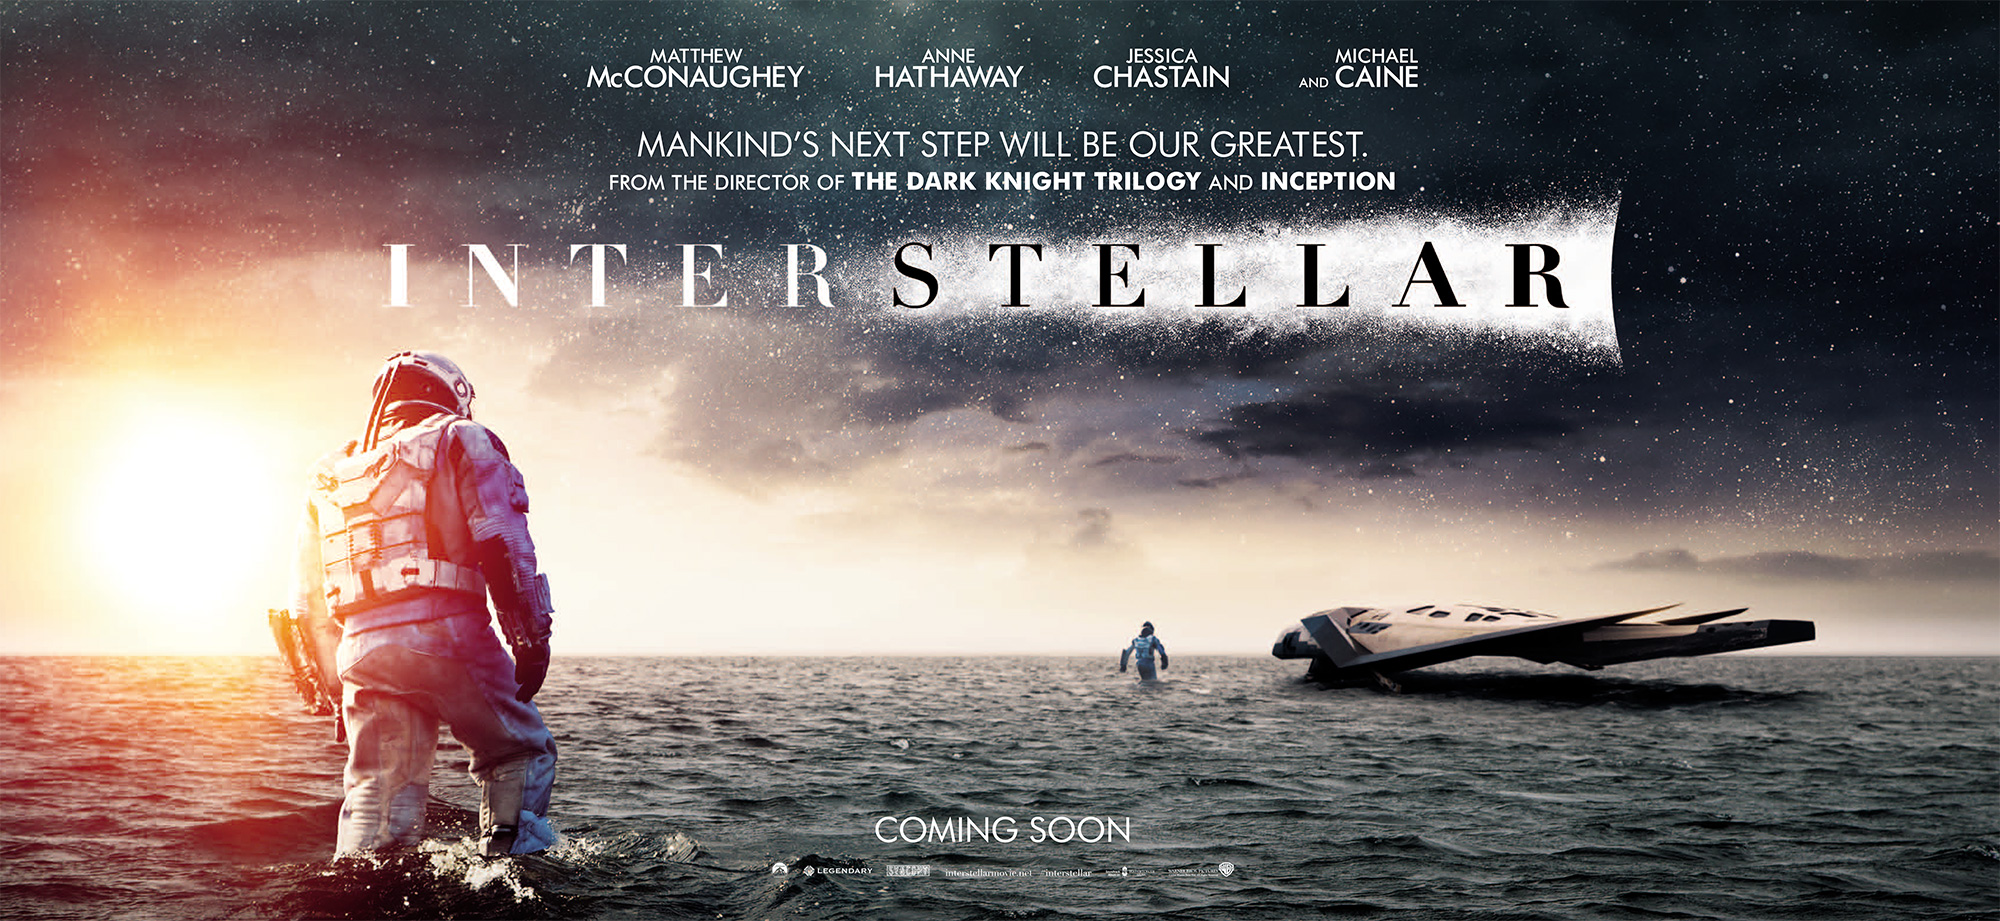 Final Trailer For Christopher Nolan's 'Interstellar,' Opening Early In